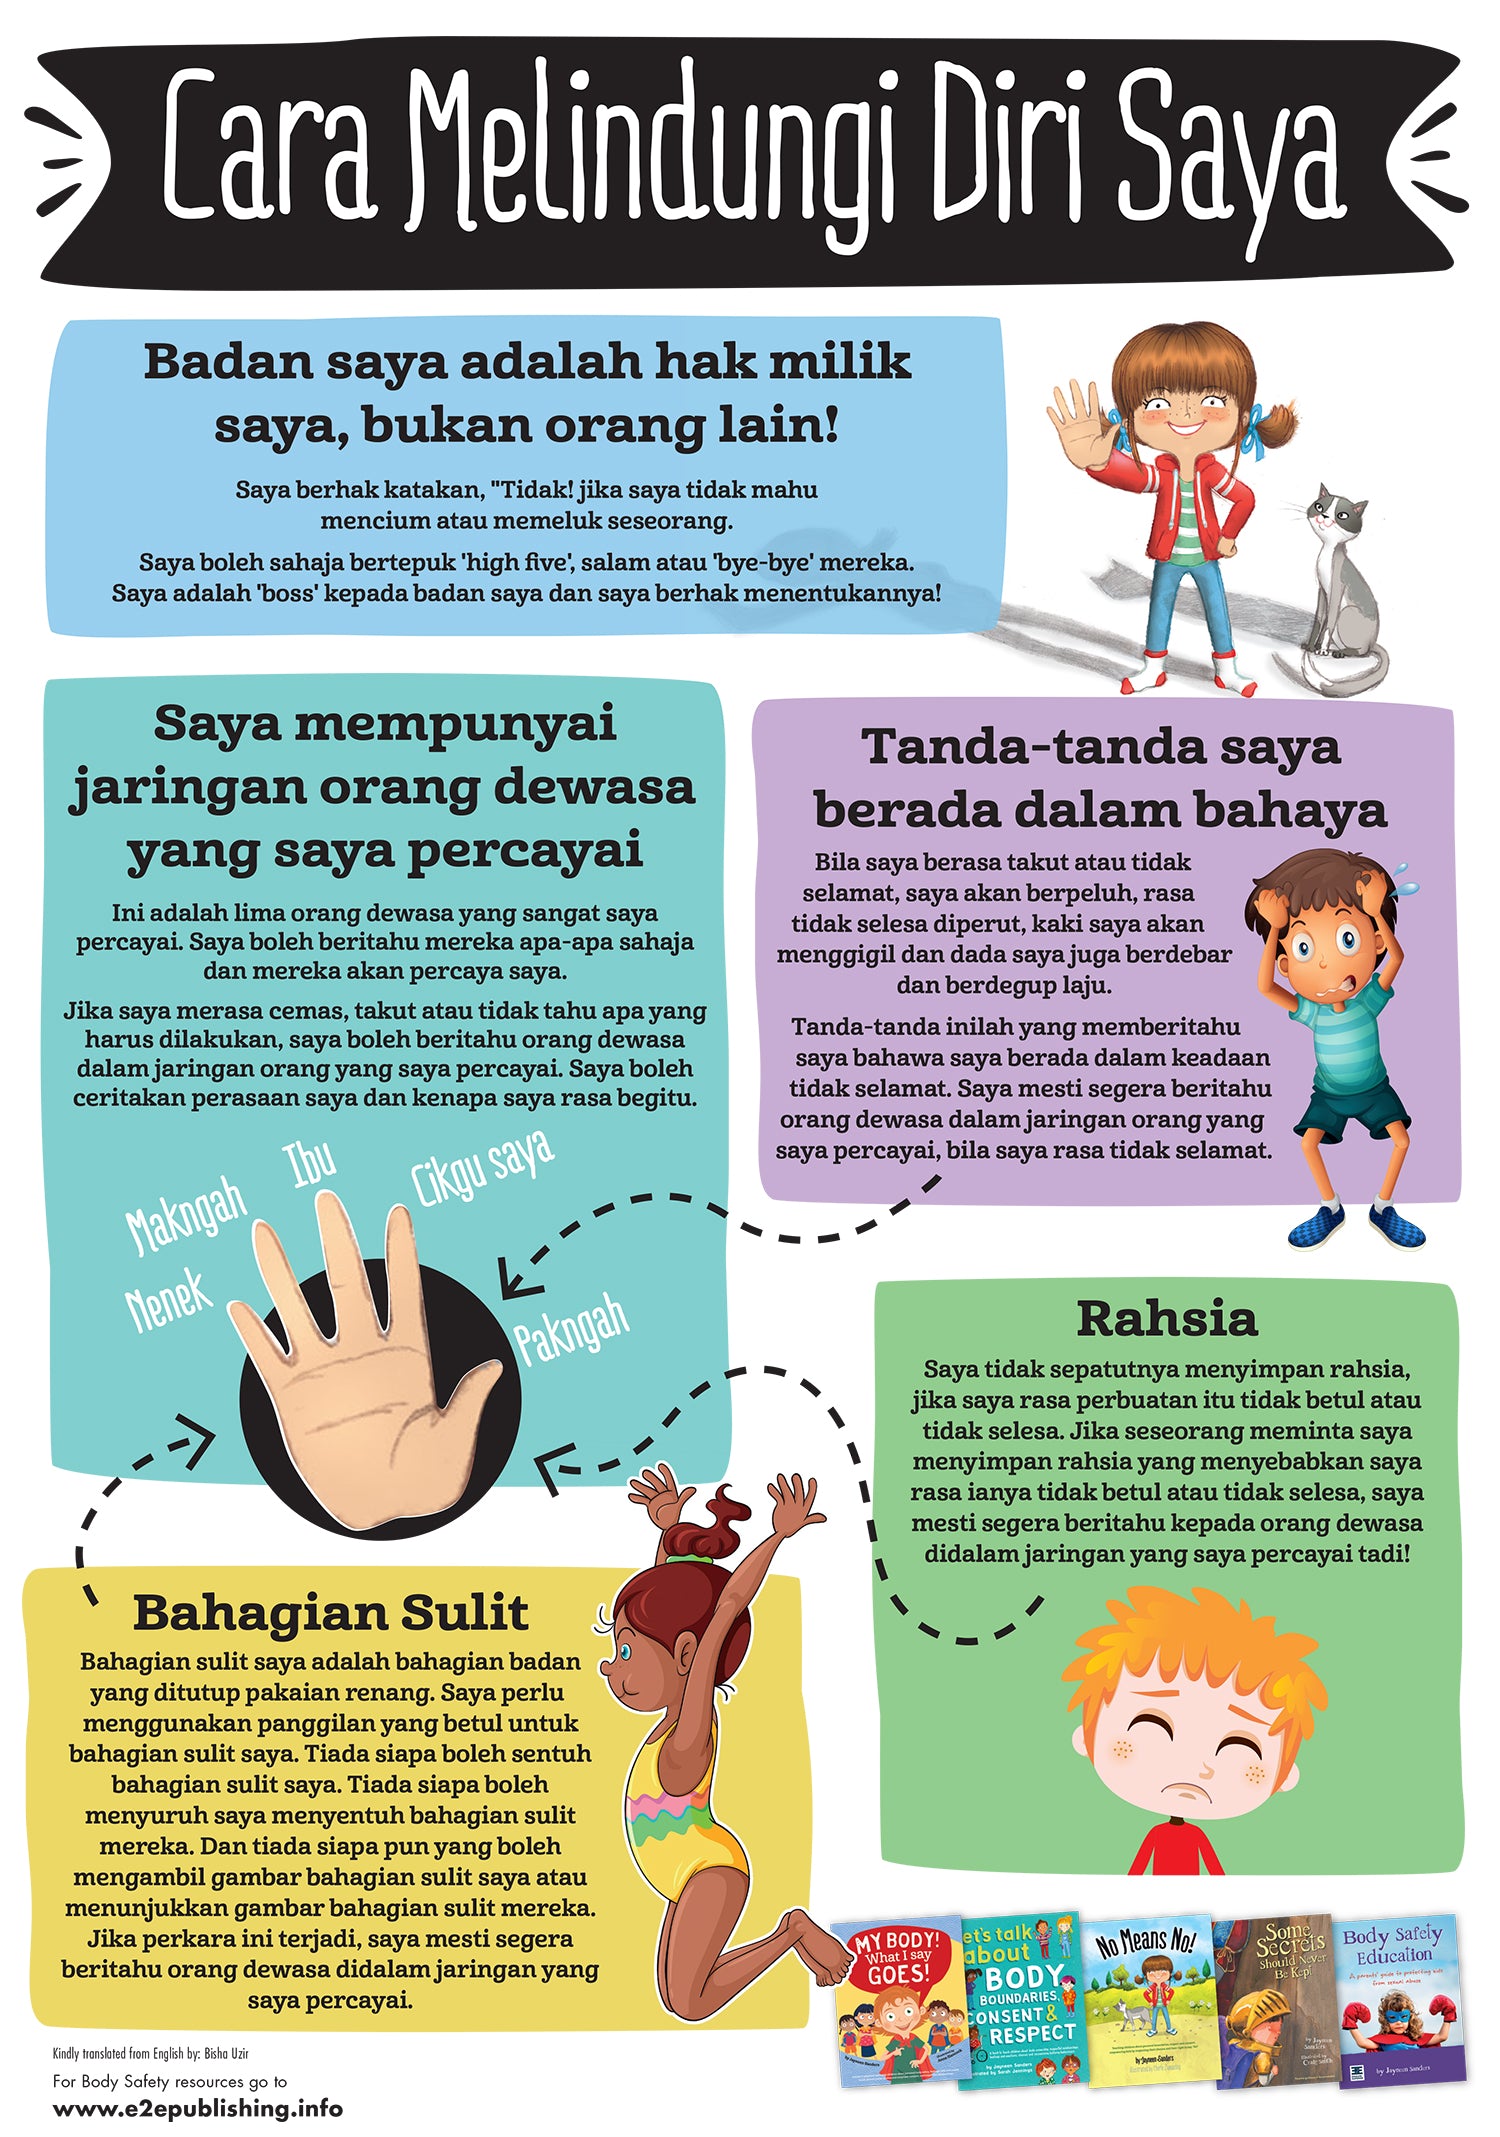 Body Safety Rules poster for children, written in Malaysian.